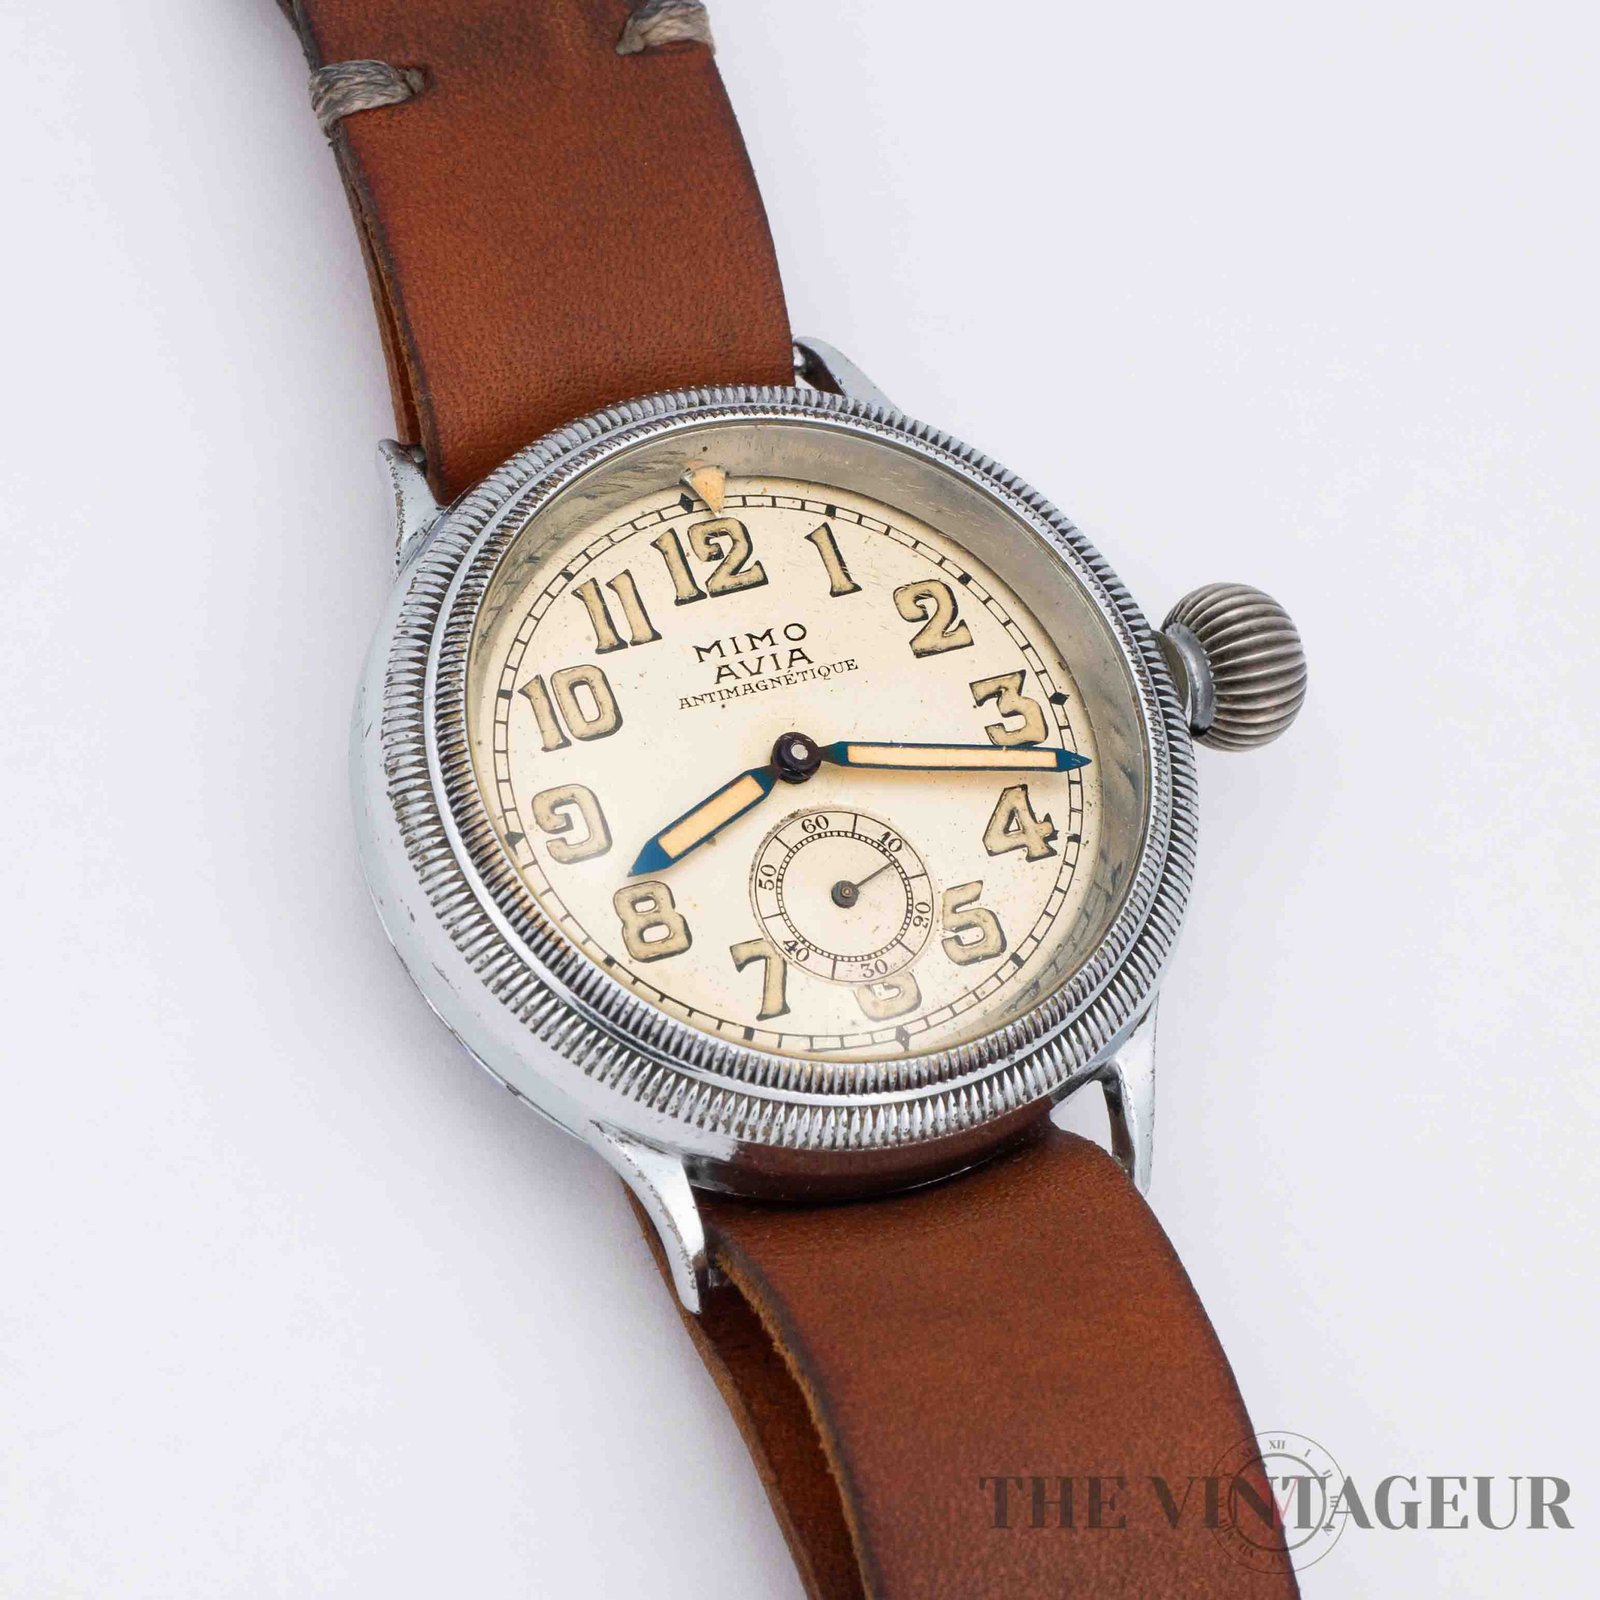 SOLD 1963 Avia 9k gold watch with papers - Birth Year Watches